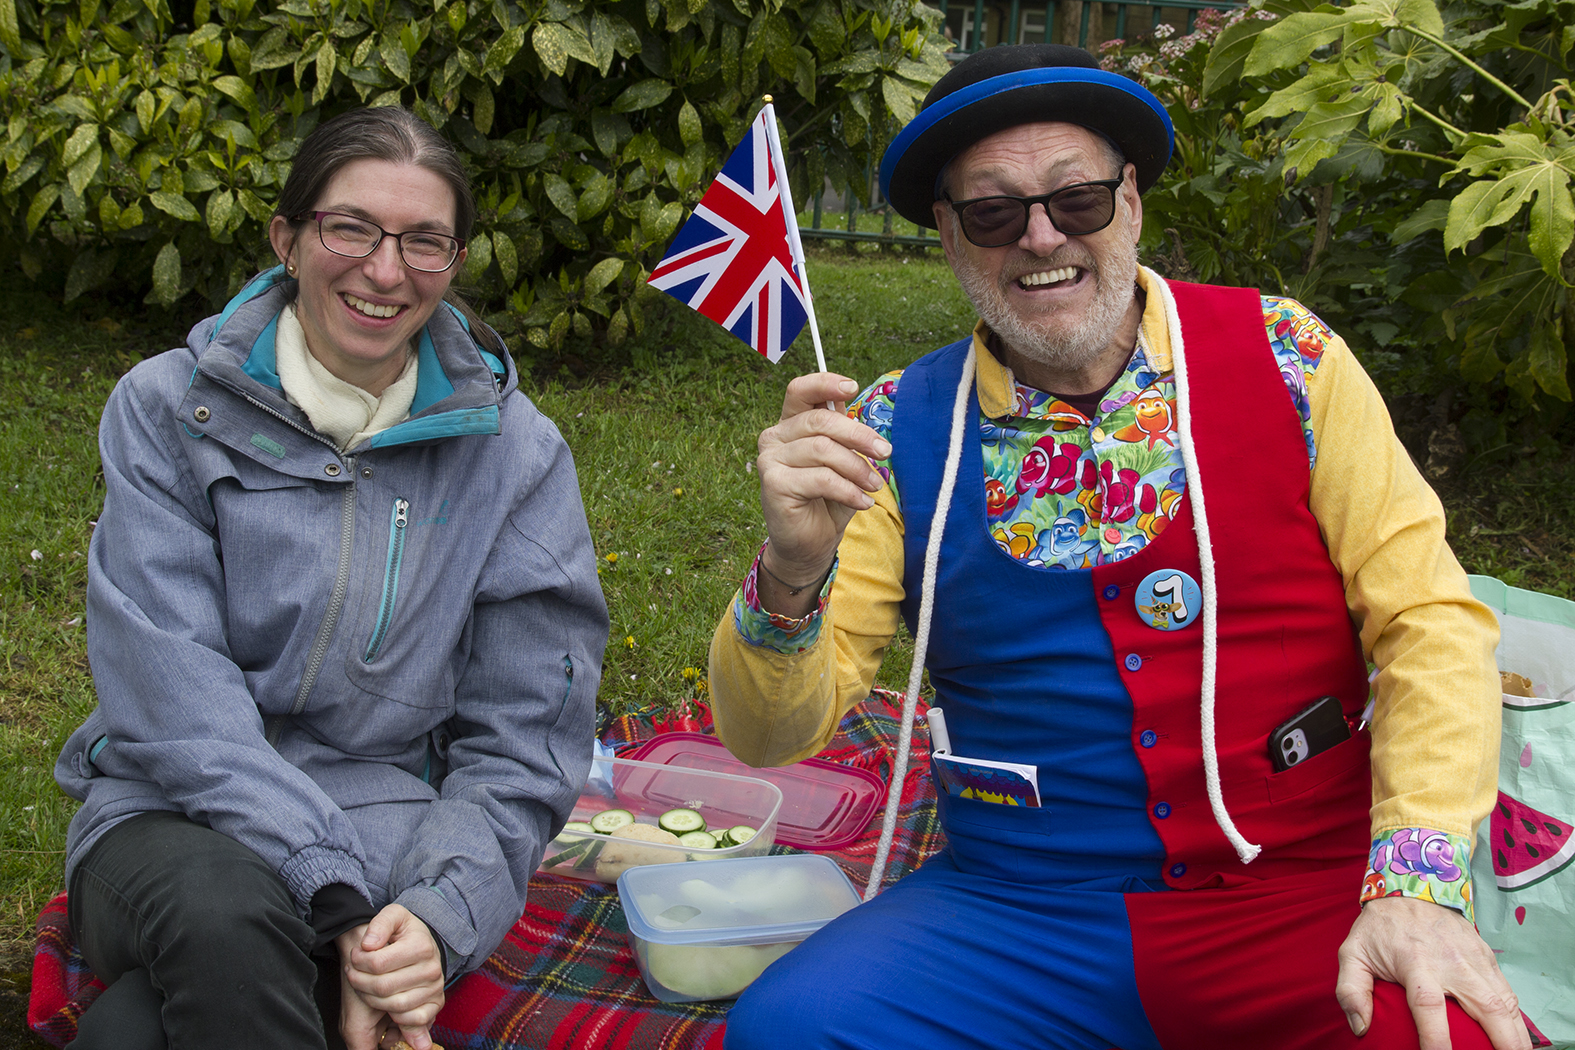 two smiling people one waving a little union jack flag wearing sunglasses and a bowler hat